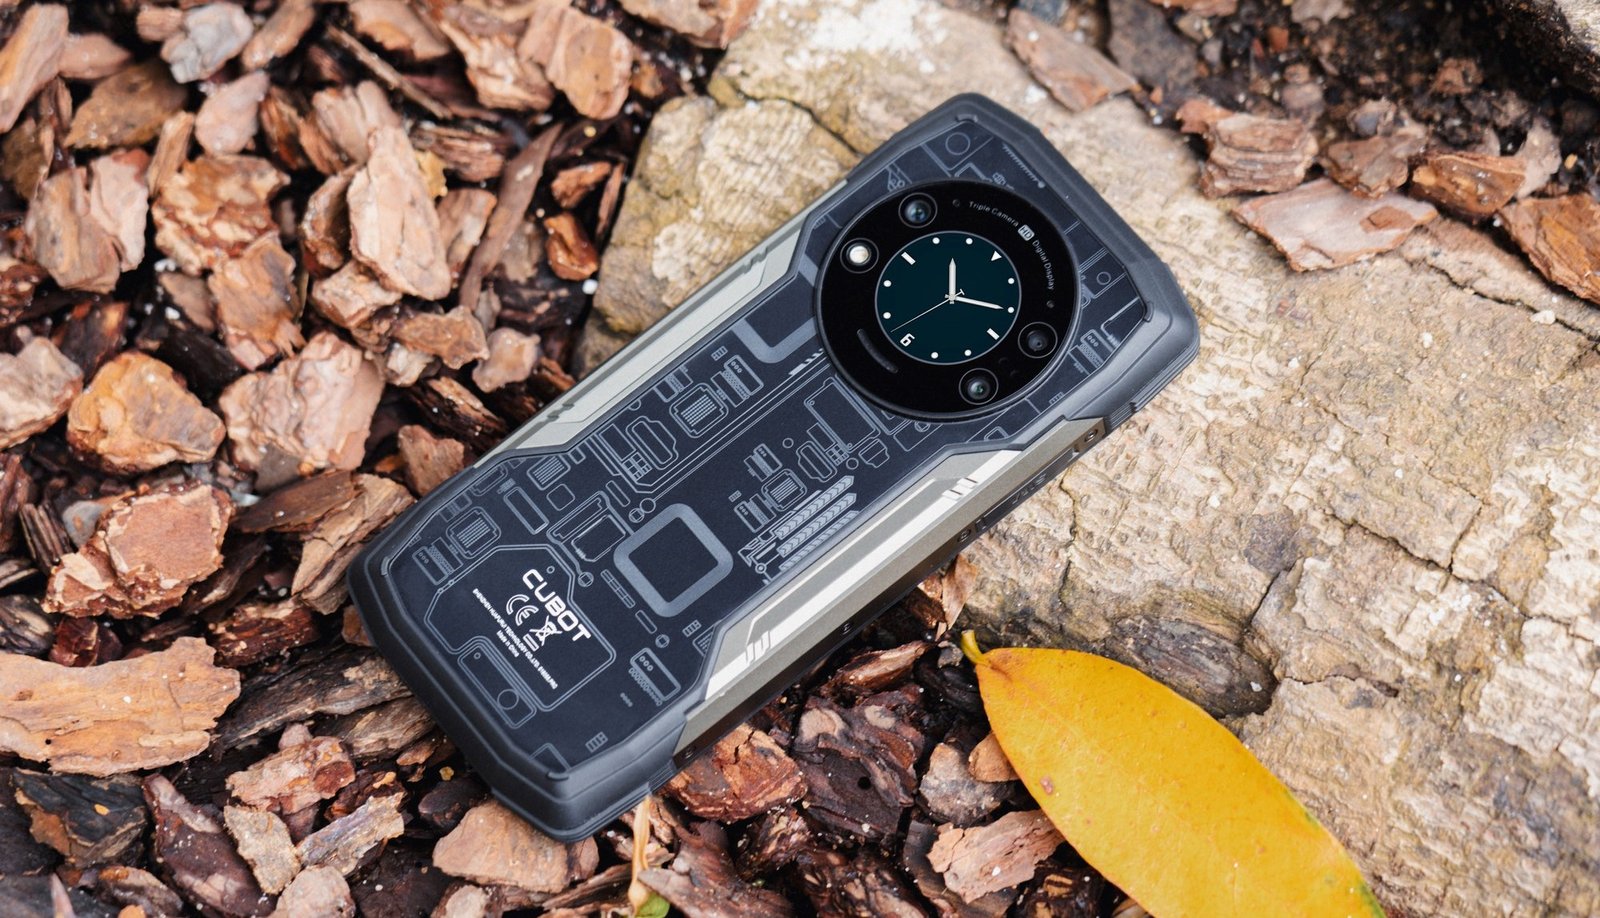 Cubot KingKong 7 review: Inexpensive Rugged Smartphone